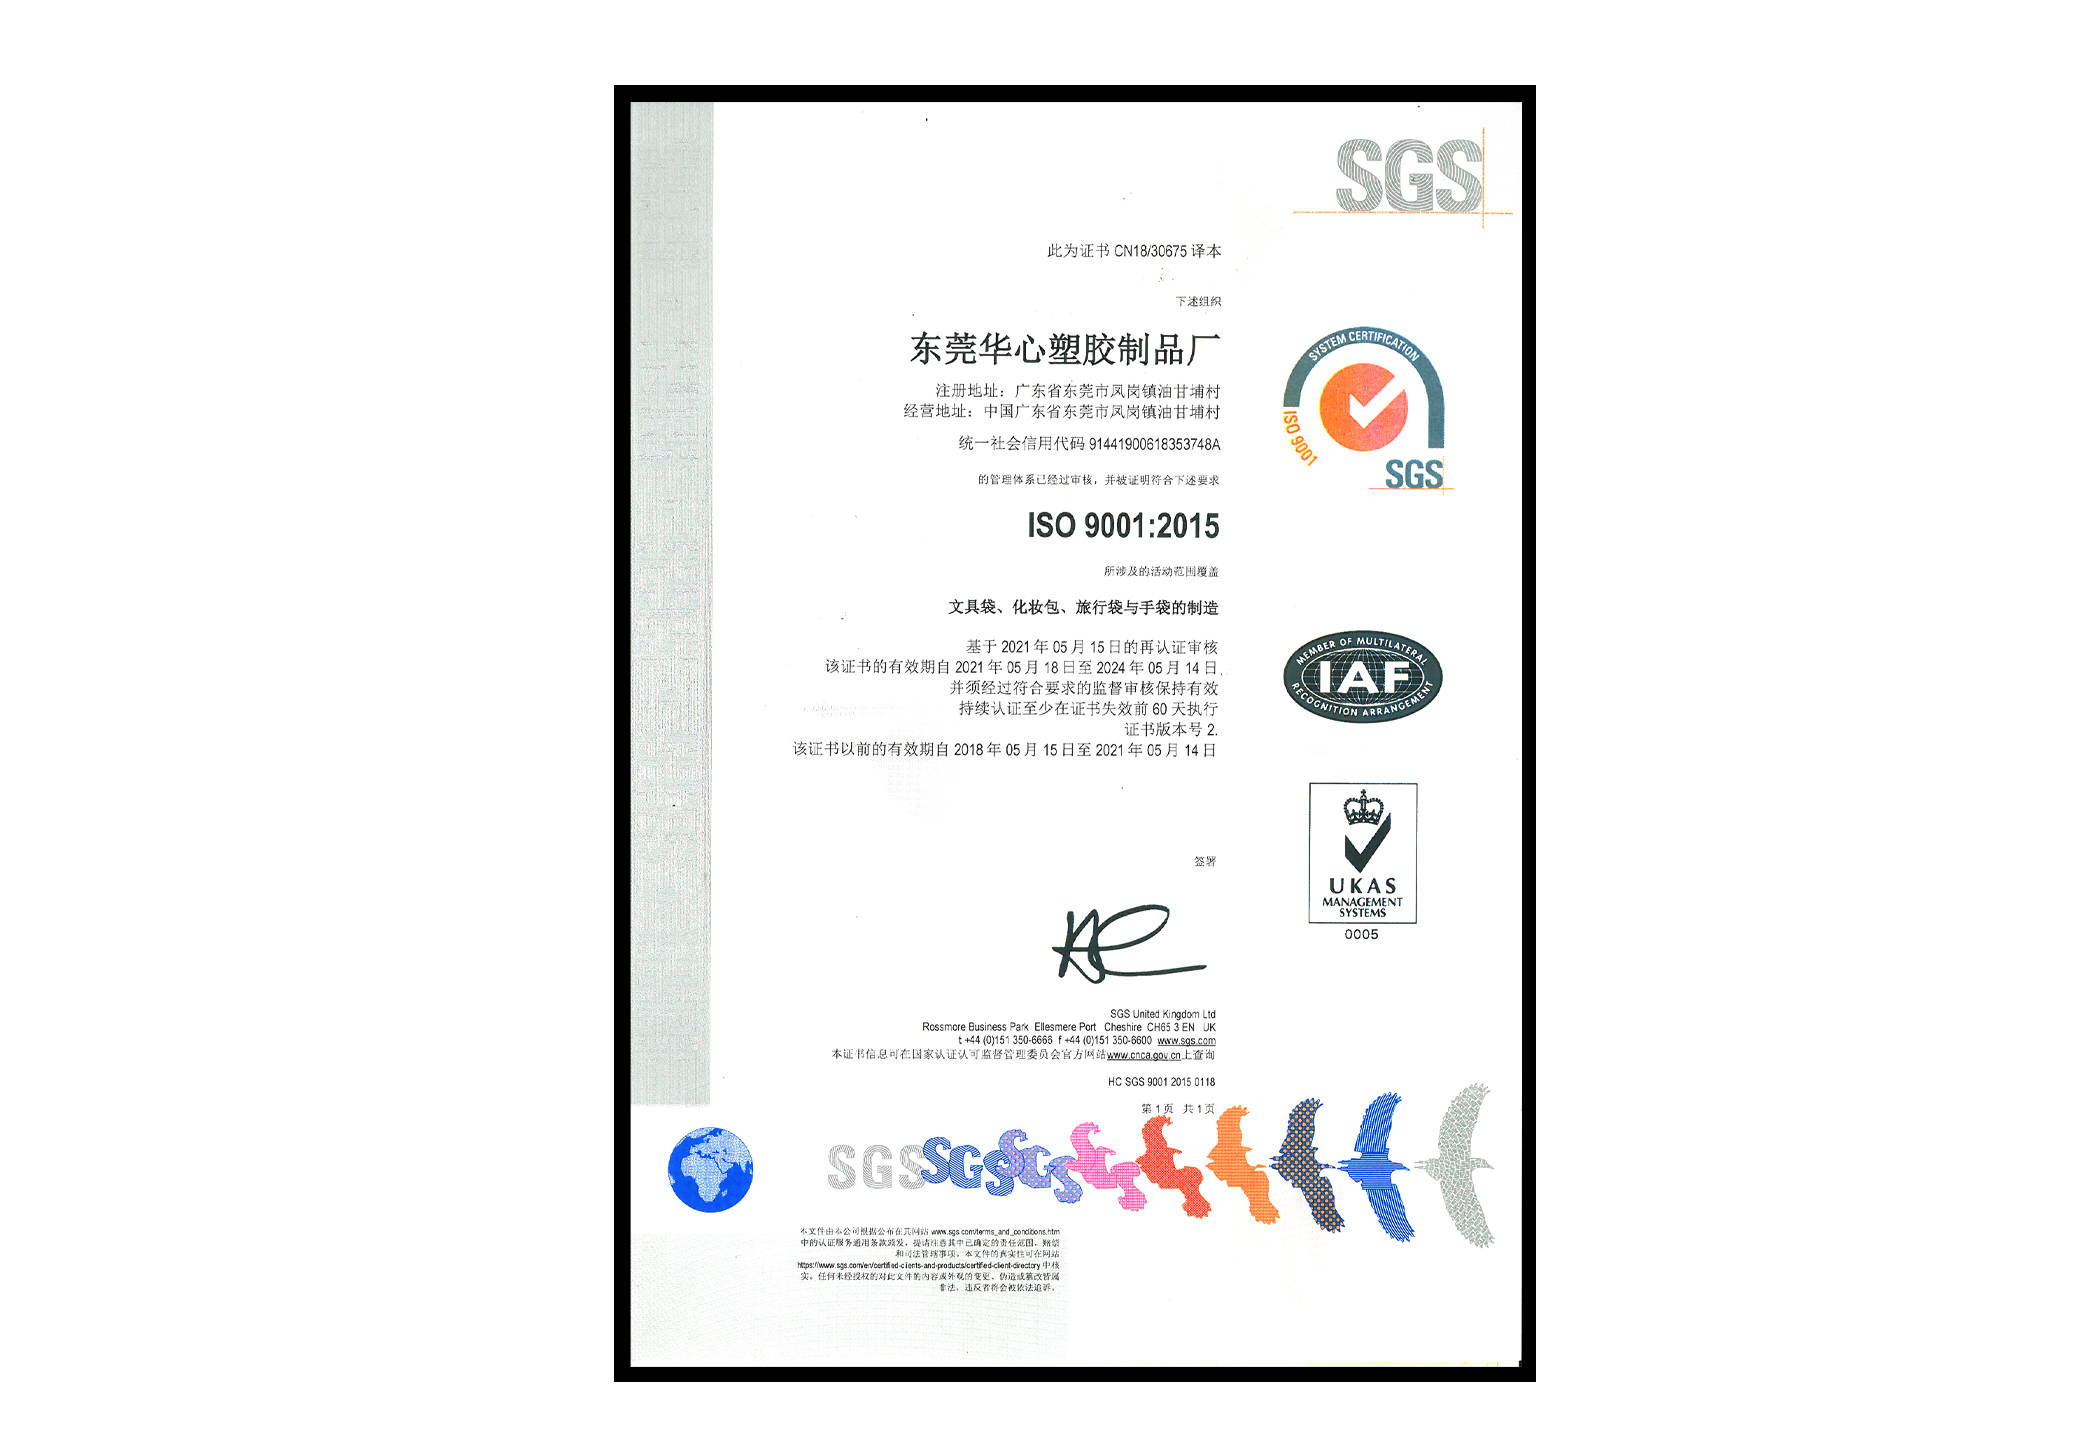 ISO 9001:2015 (2021 - 2024)